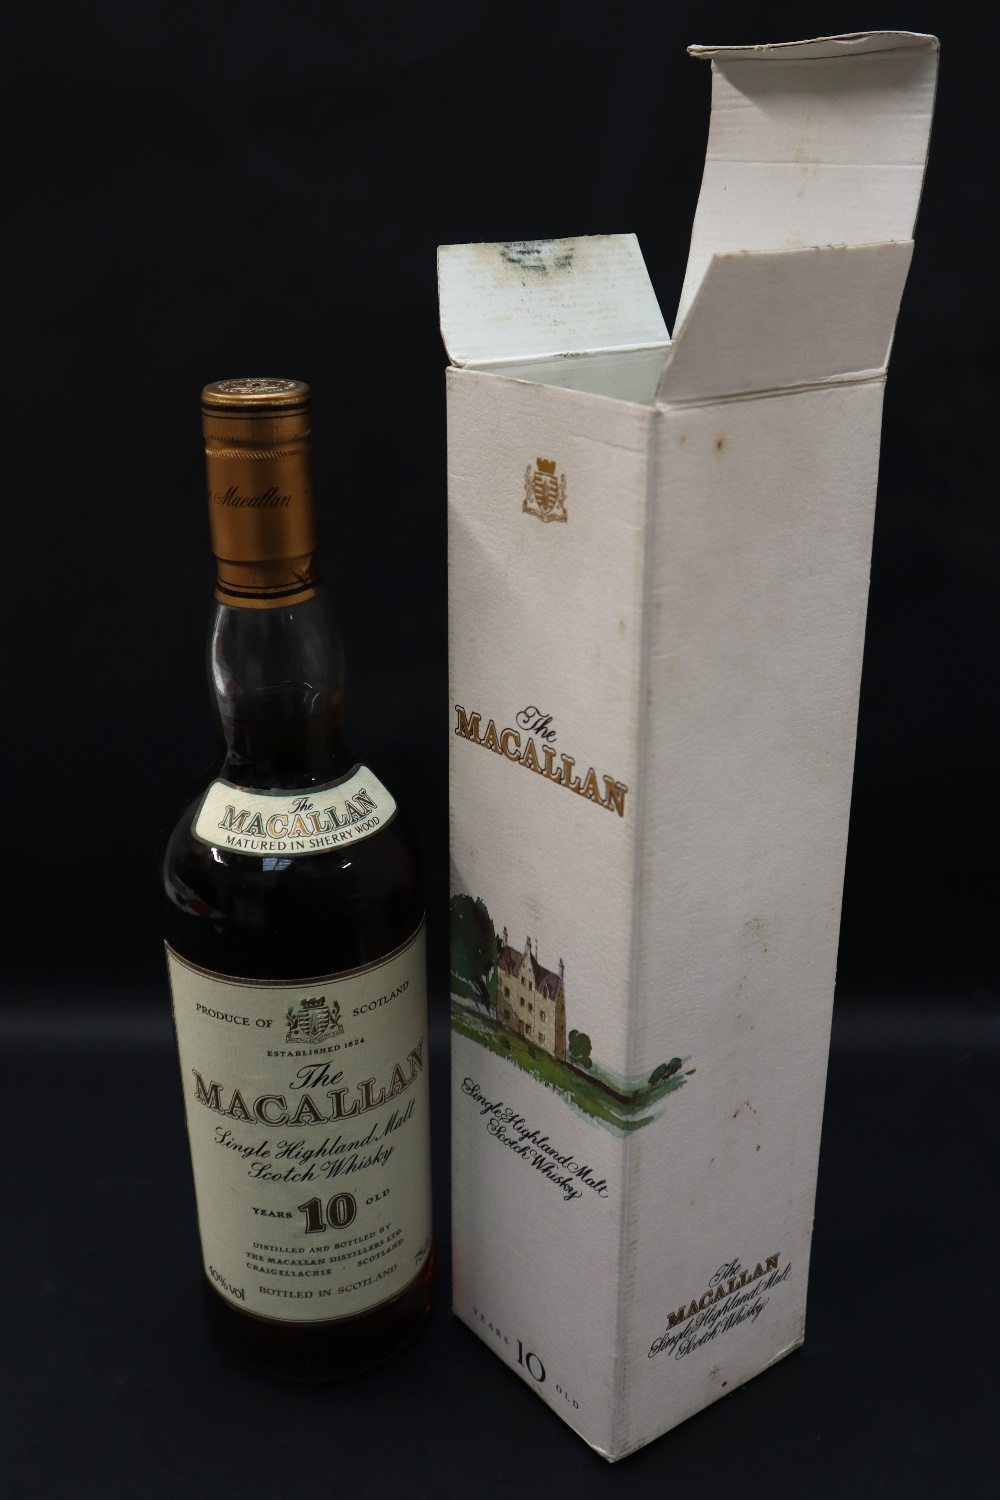 A bottle of The Macallan Single Highland Malt Scotch Whisky 10 Years Old, - Image 4 of 5